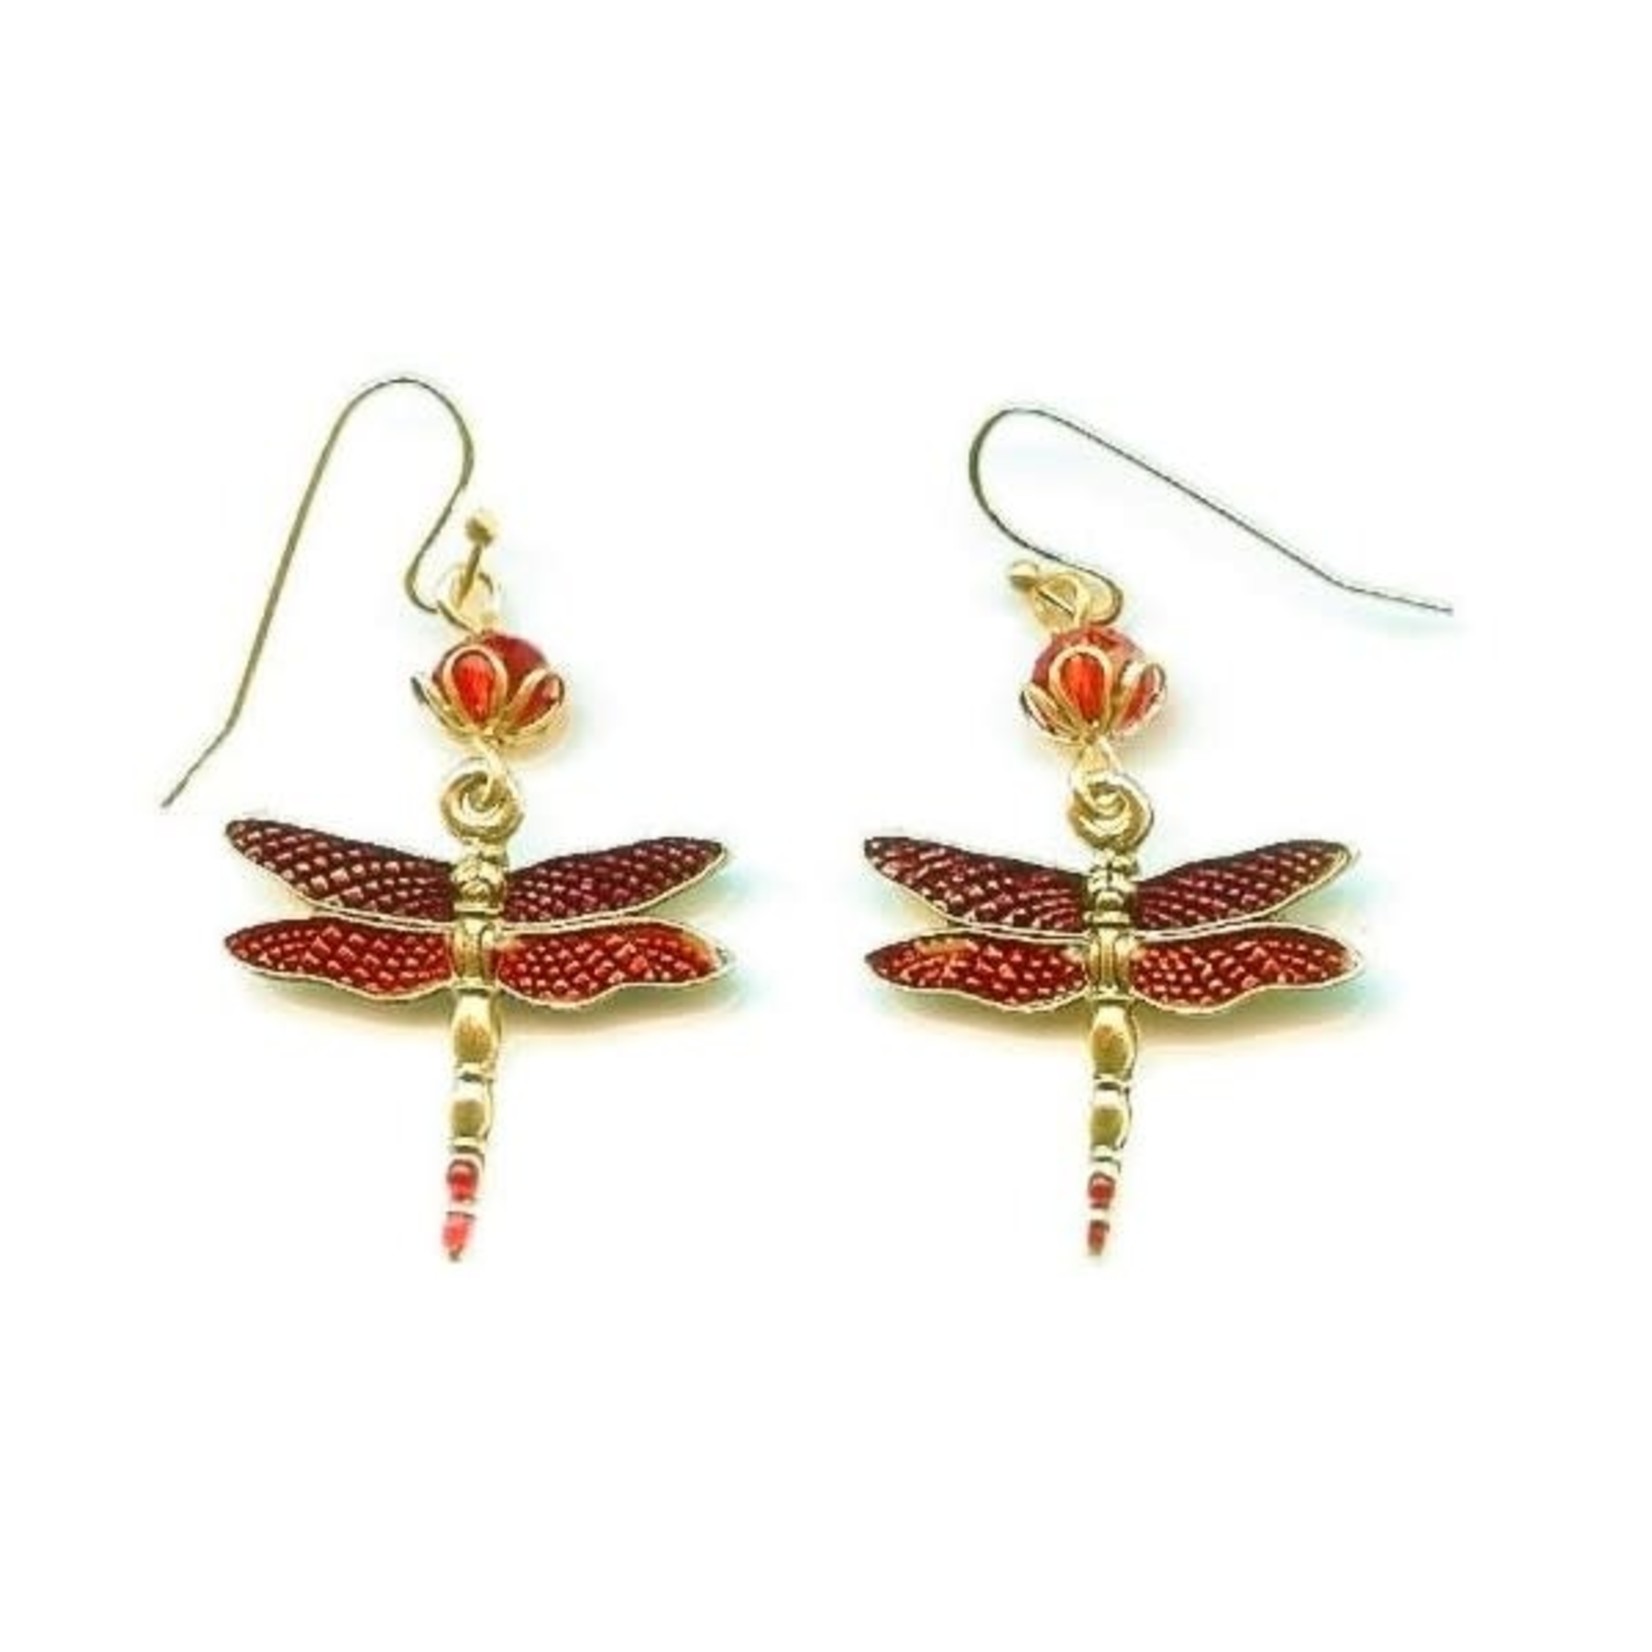 Bead Inspirations Vibrant Dragonfly Red Earring Kit